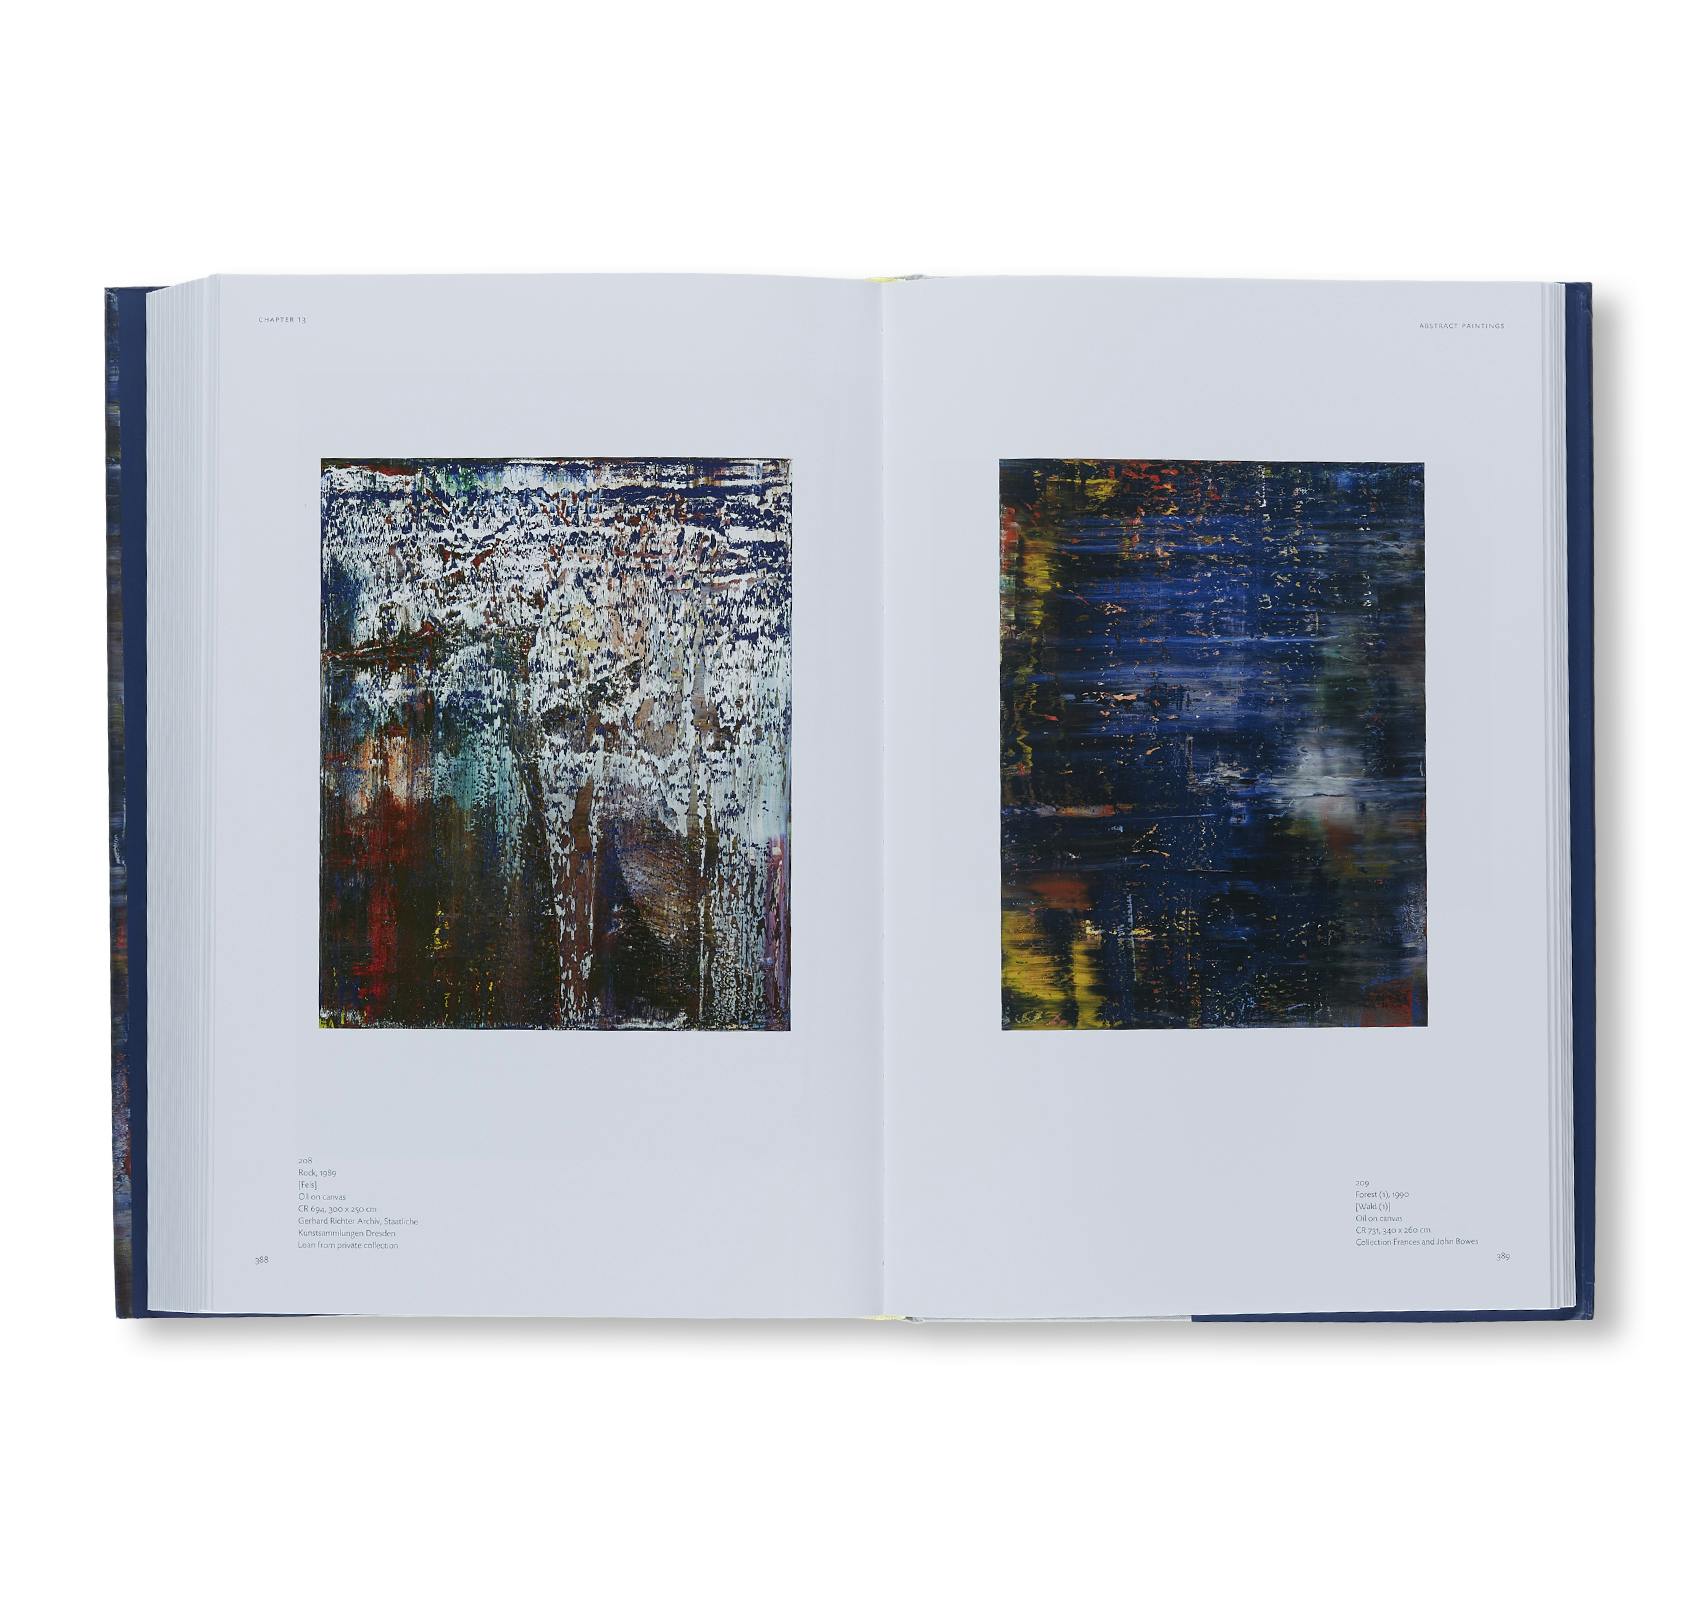 PAINTING：ゲルハルト・リヒターの販売・通販　LIFE　IS　by　美術手帖　THINKING　WORK:　AND　PAINTING　IN　OIL　GERHARD　RICHTER